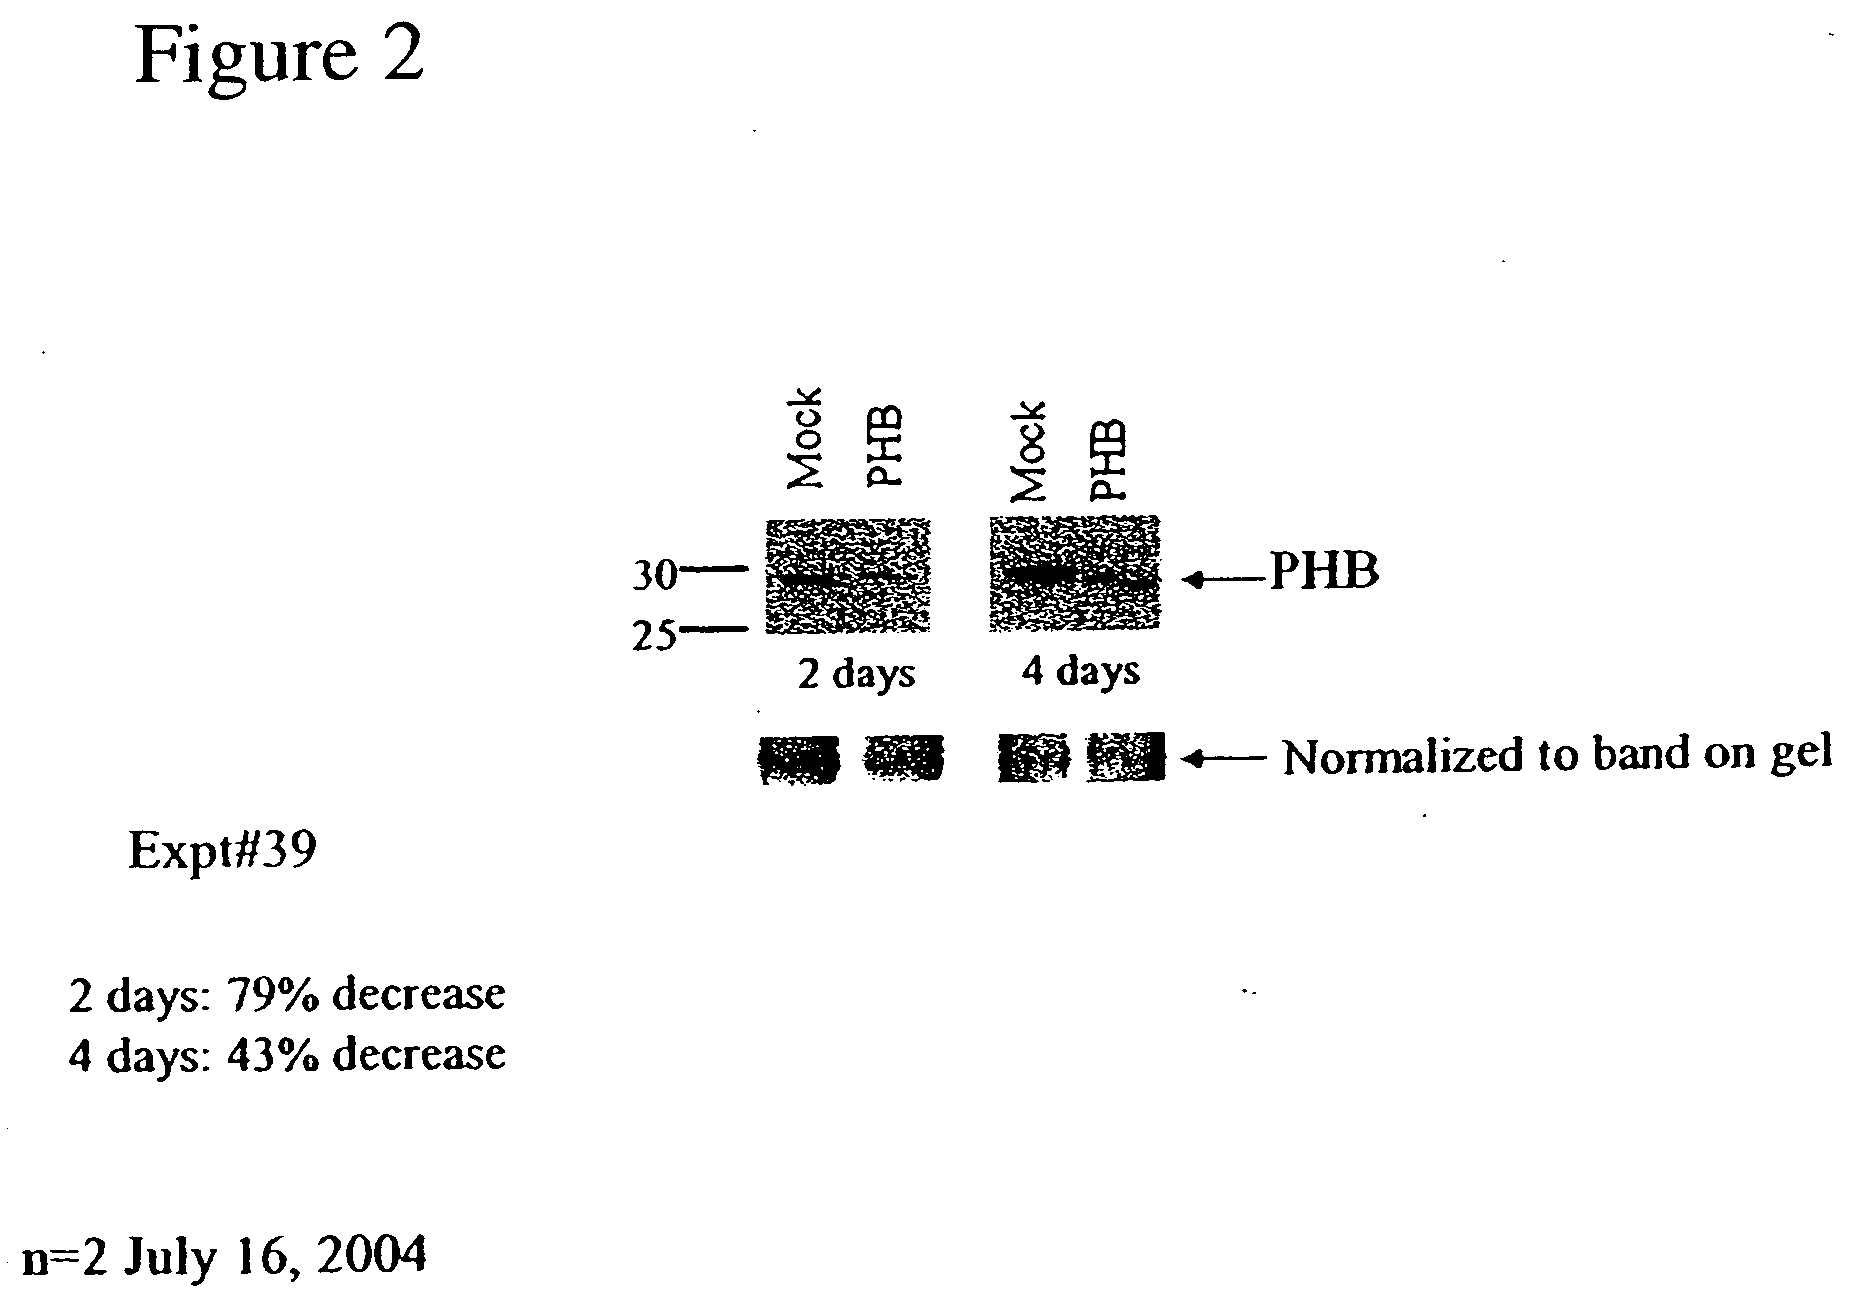 Prohibitin-directed diagnostics and therapeutics for cancer and chemotherapeutic drug resistance